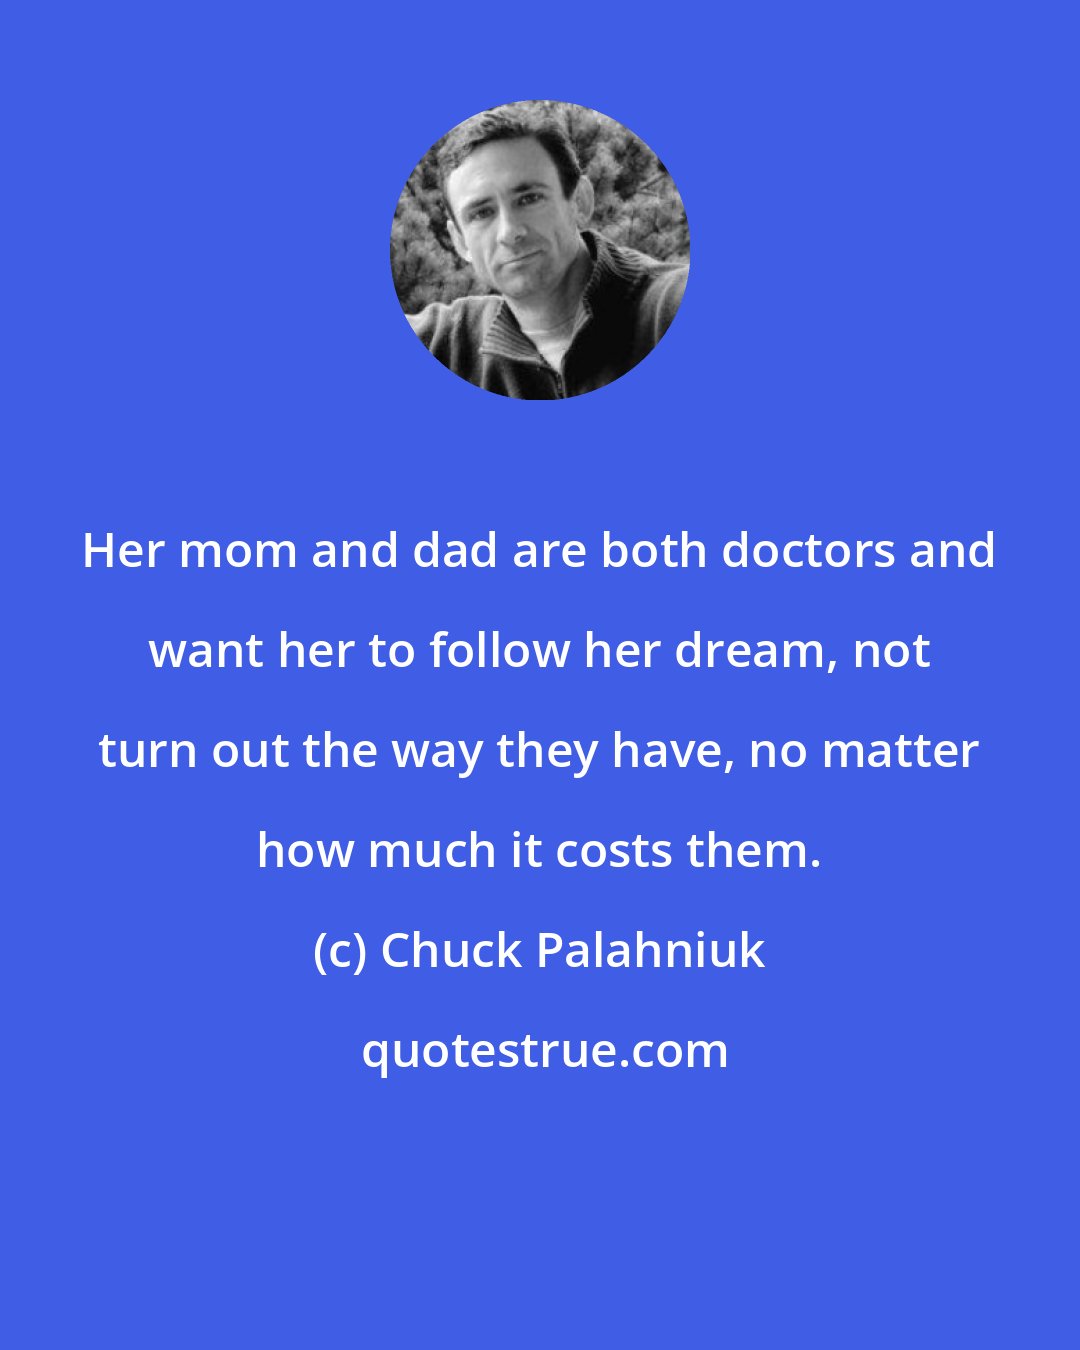 Chuck Palahniuk: Her mom and dad are both doctors and want her to follow her dream, not turn out the way they have, no matter how much it costs them.